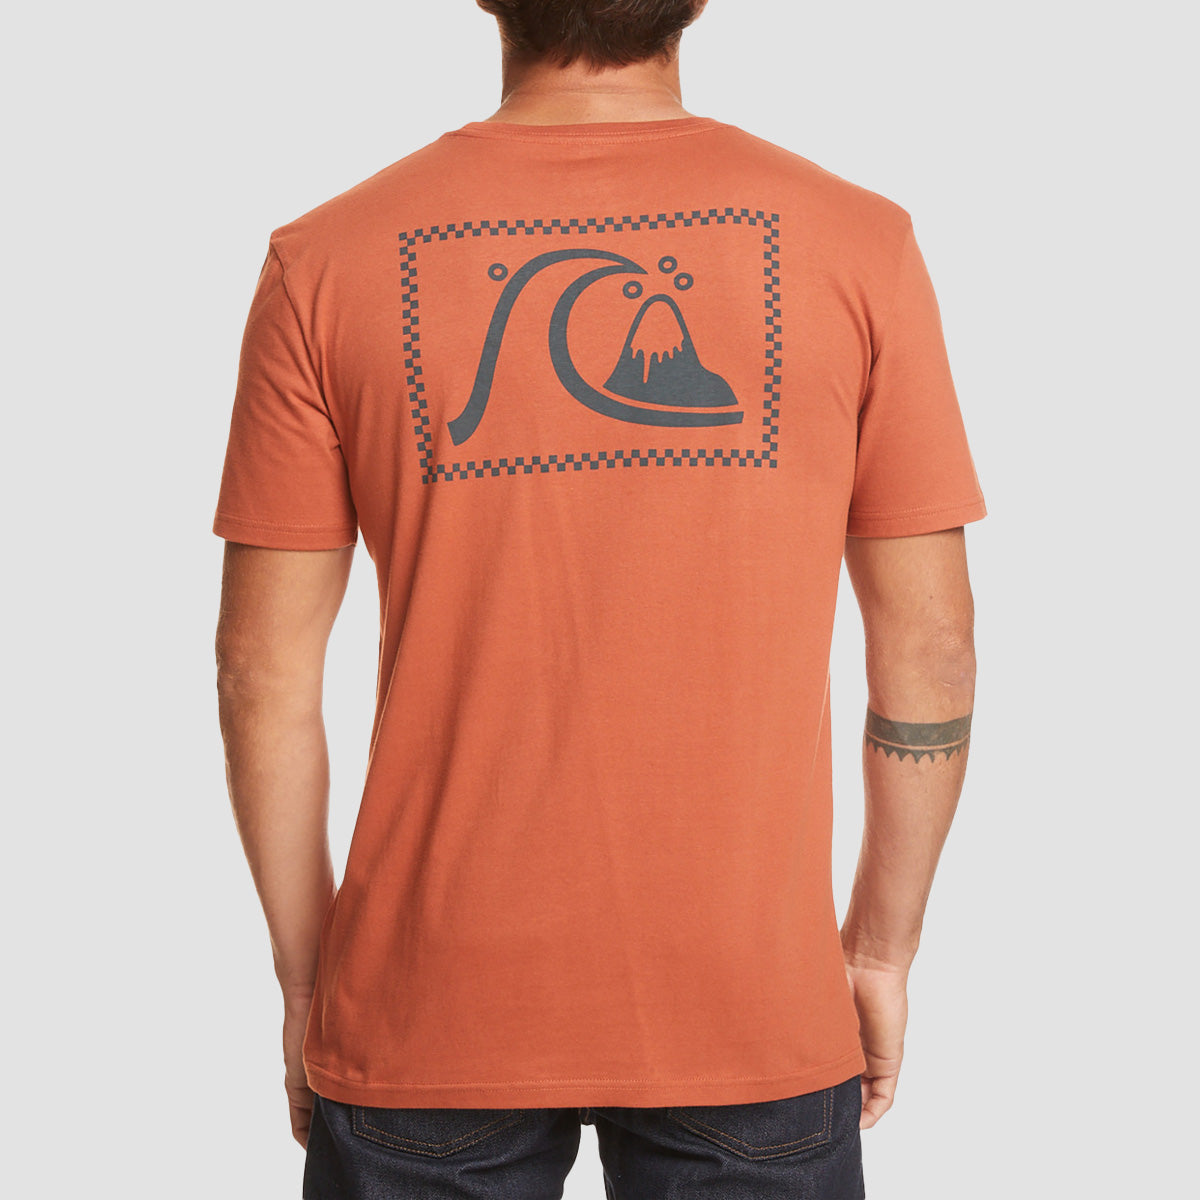 Quiksilver The Original T-Shirt Baked Clay